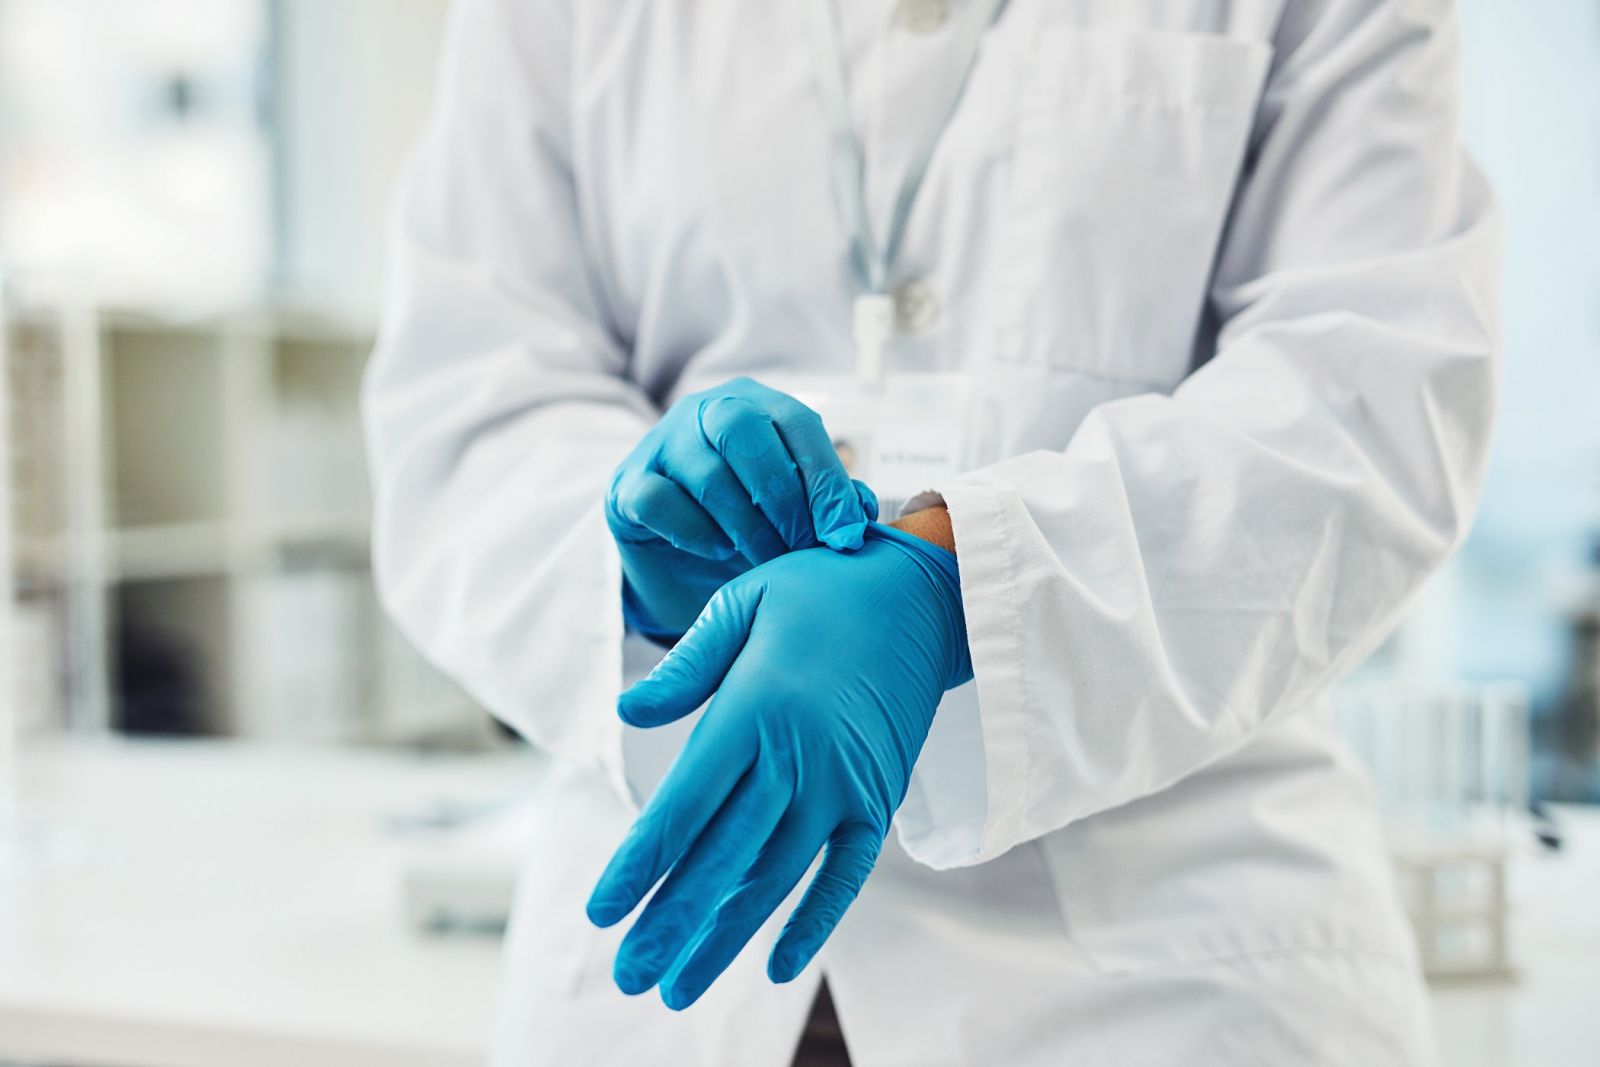 South Carolina has a history of glove manufacturing, according to Garcia, and also has become a home to some new PPE production companies, such as Nephron Nitrile, since 2020. (Photo/Provided)